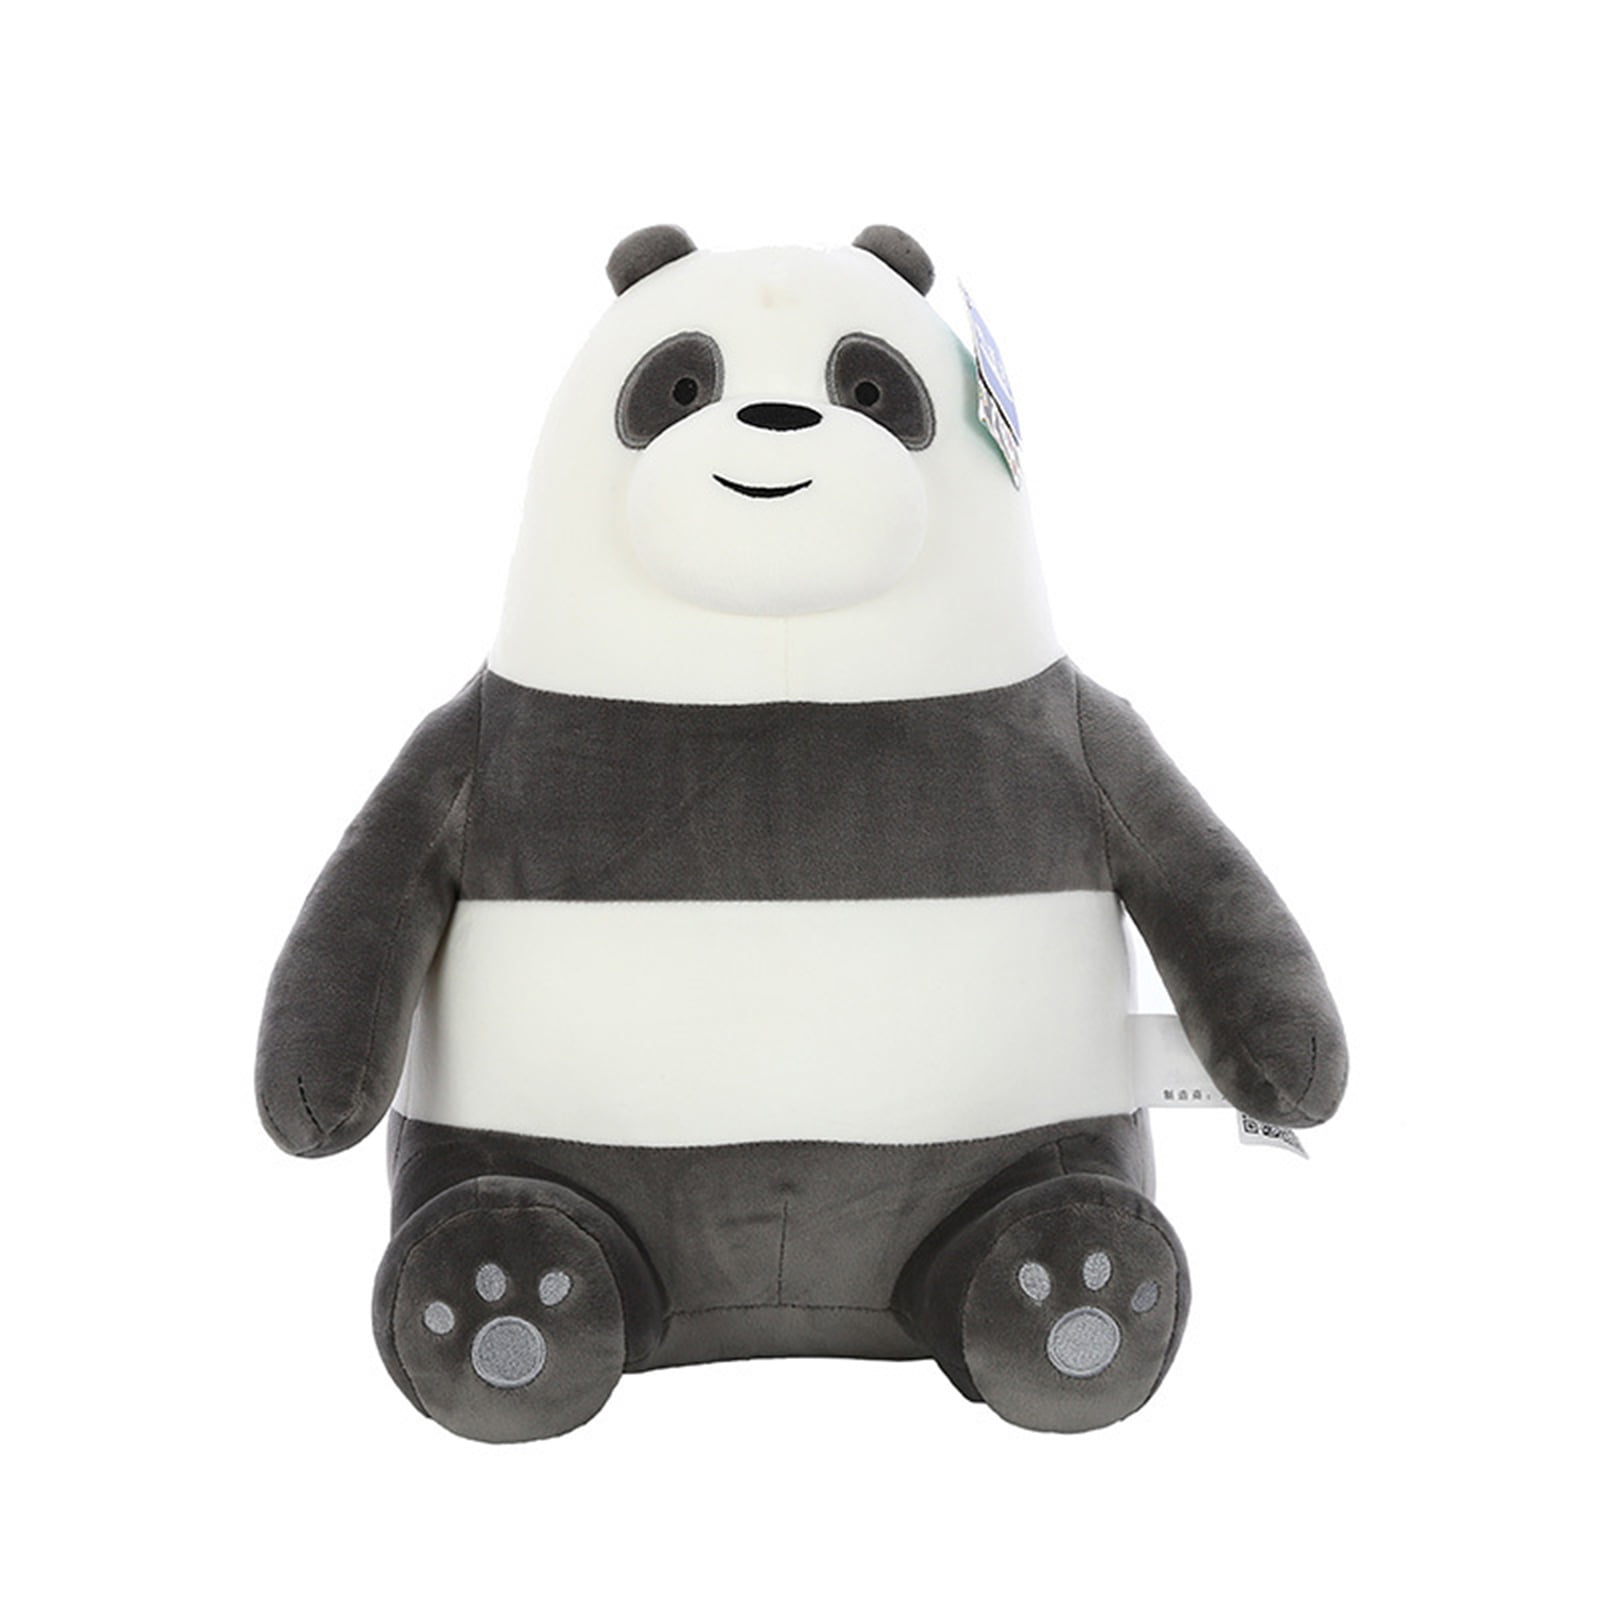 NEW TV Show We Bare Bears Grizzly Panda Ice bear plush toy doll 